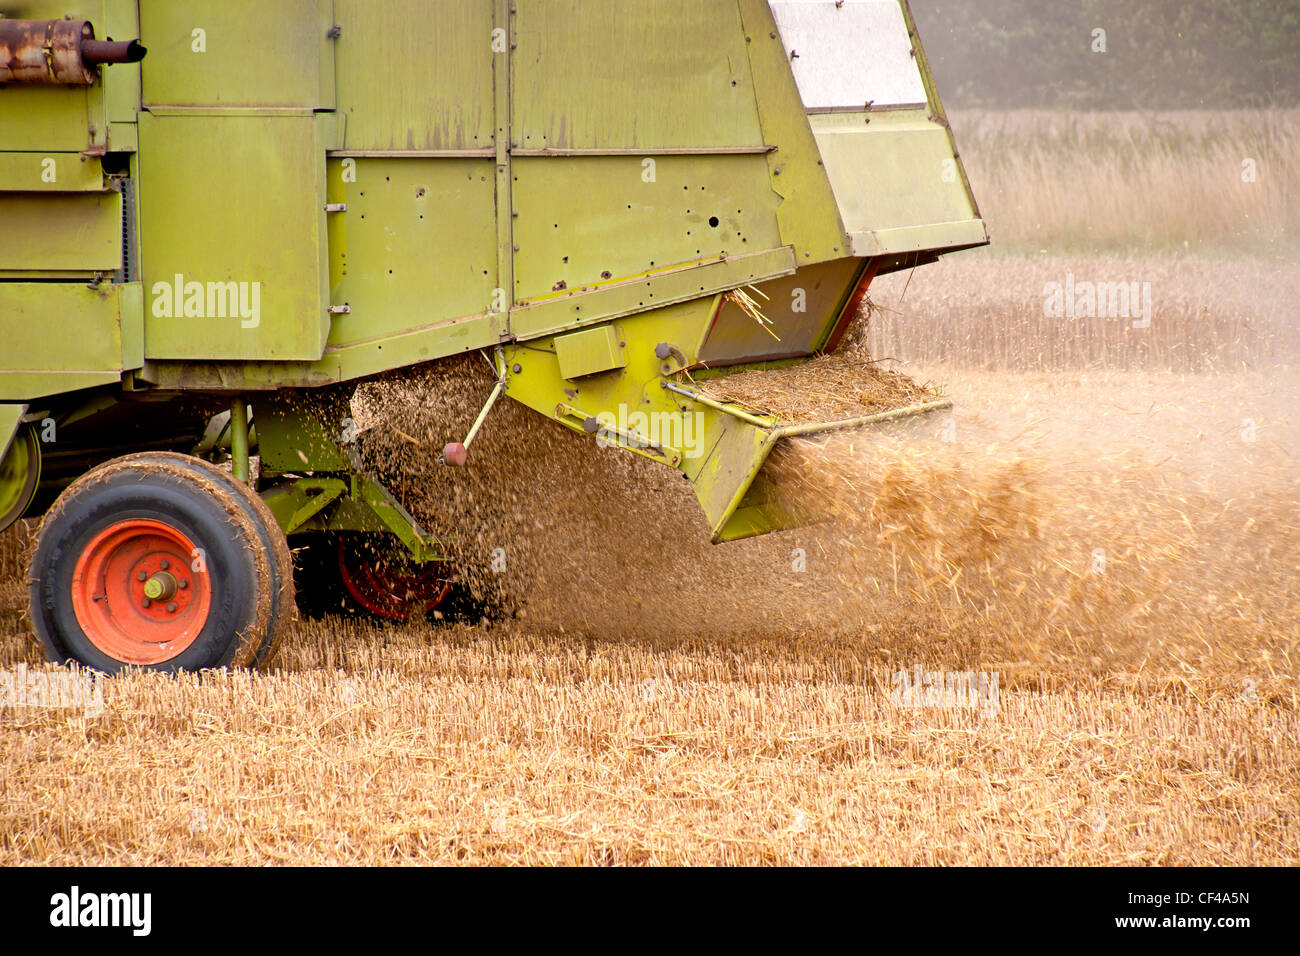 A combine harvester ejects chaff after harvesting the wheat grain. Stock Photo